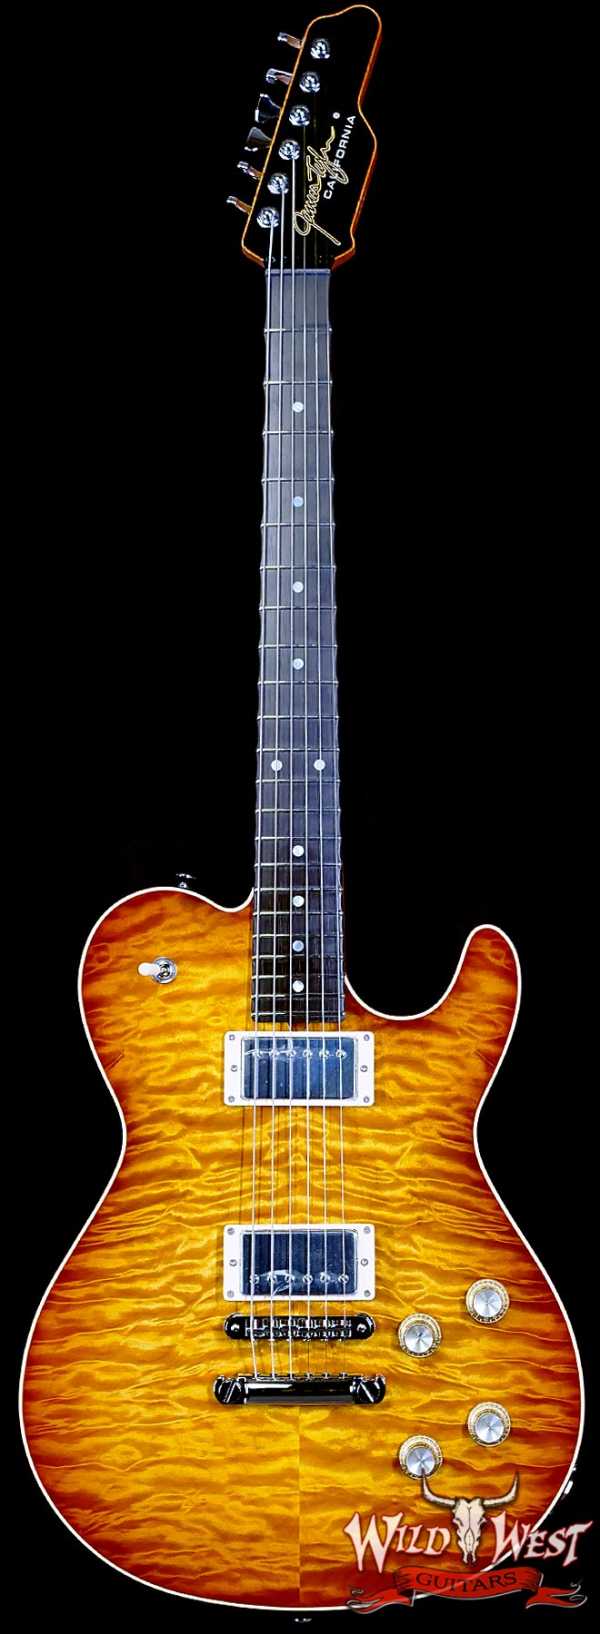 James Tyler USA Mongoose Special Quilted Maple Top Brazilian Rosewood Fingerboard Honey Burst 6.90 LBS (US Only / No International Shipping)